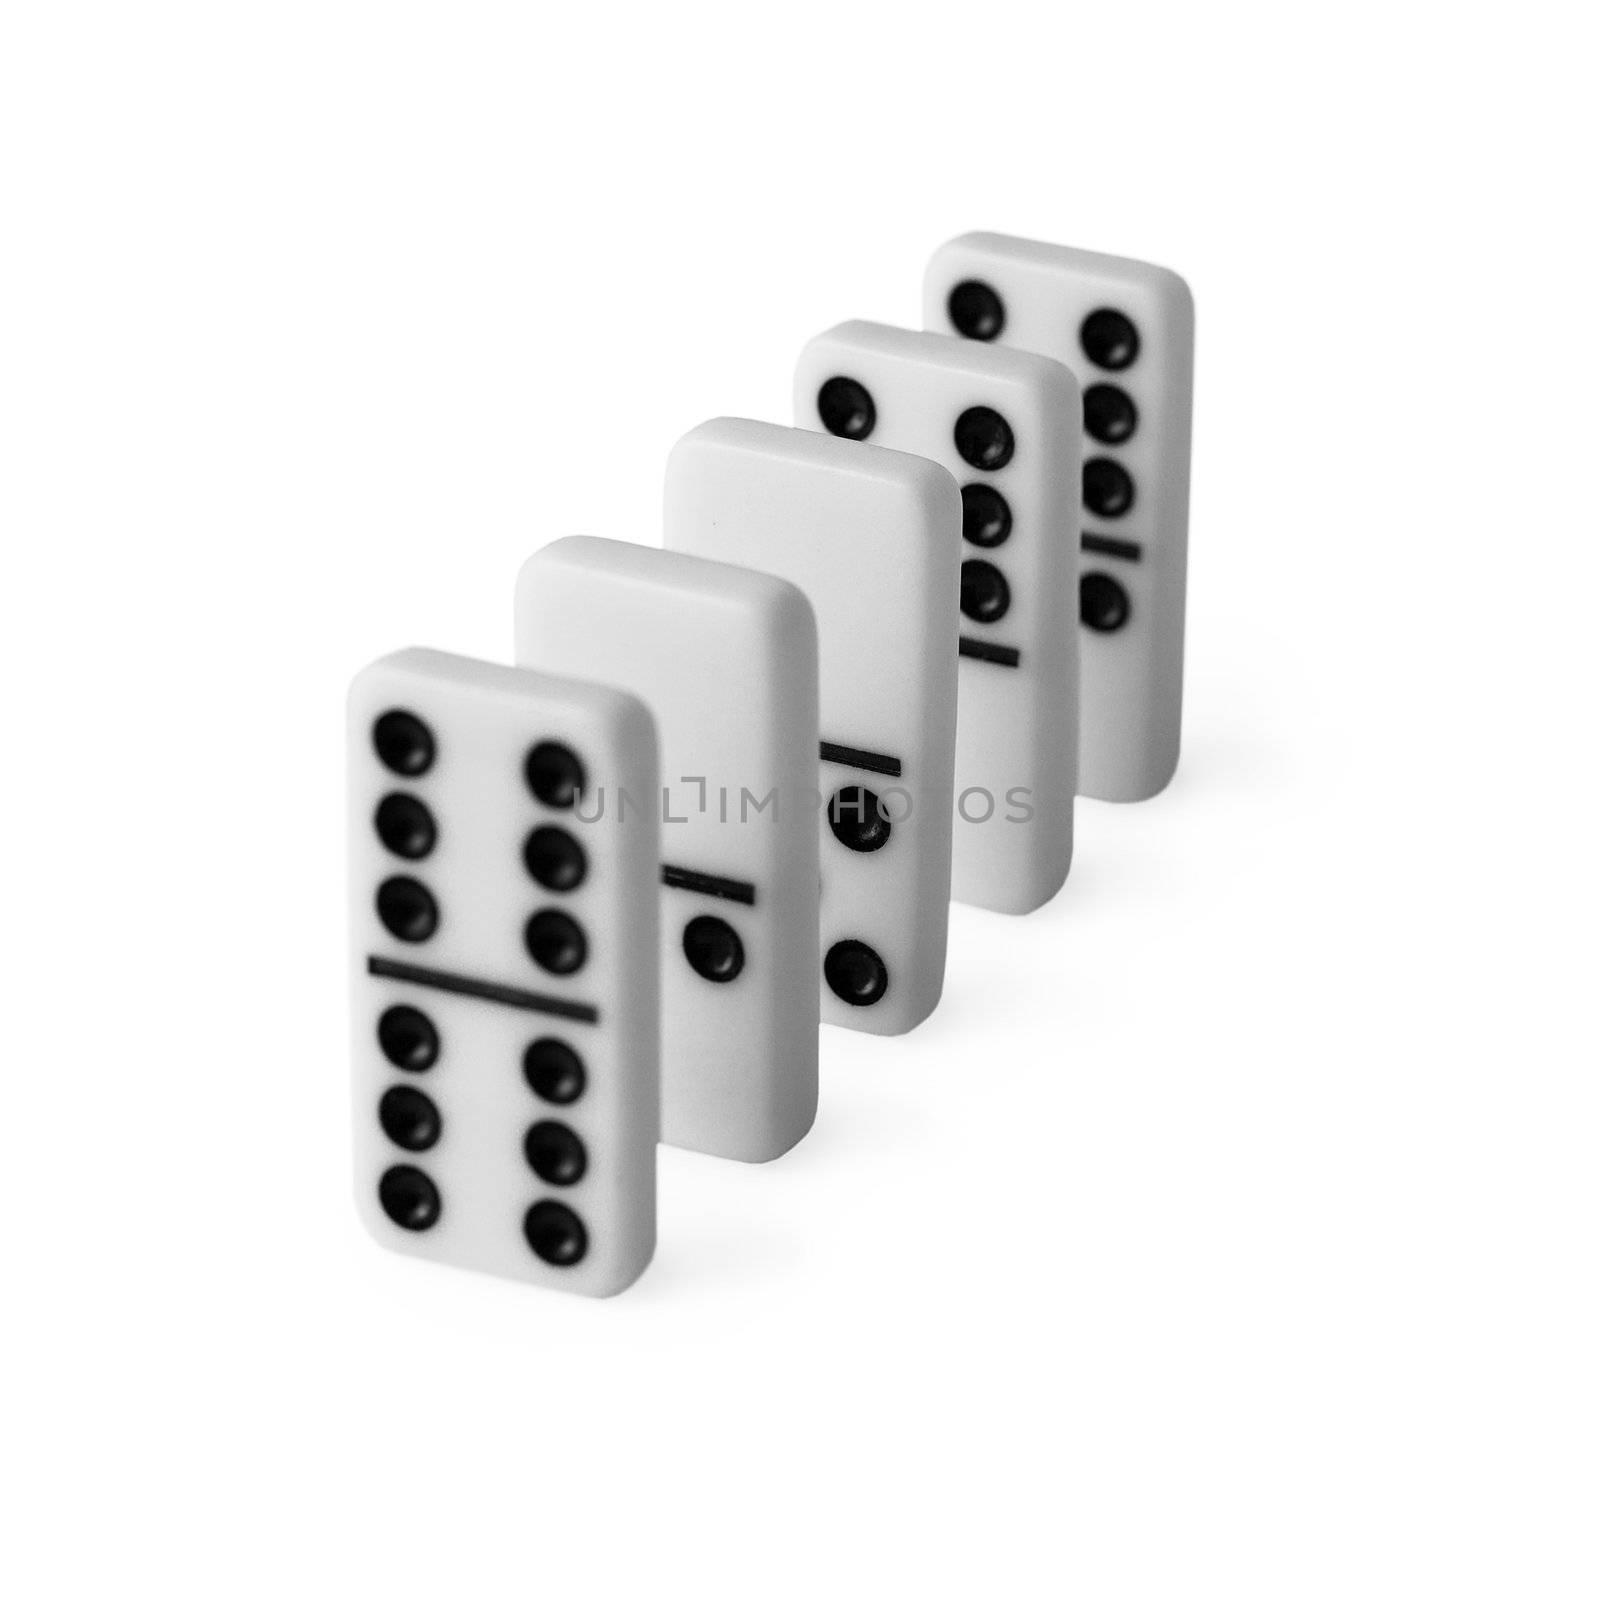 Dominoes set in row on white background by pzaxe